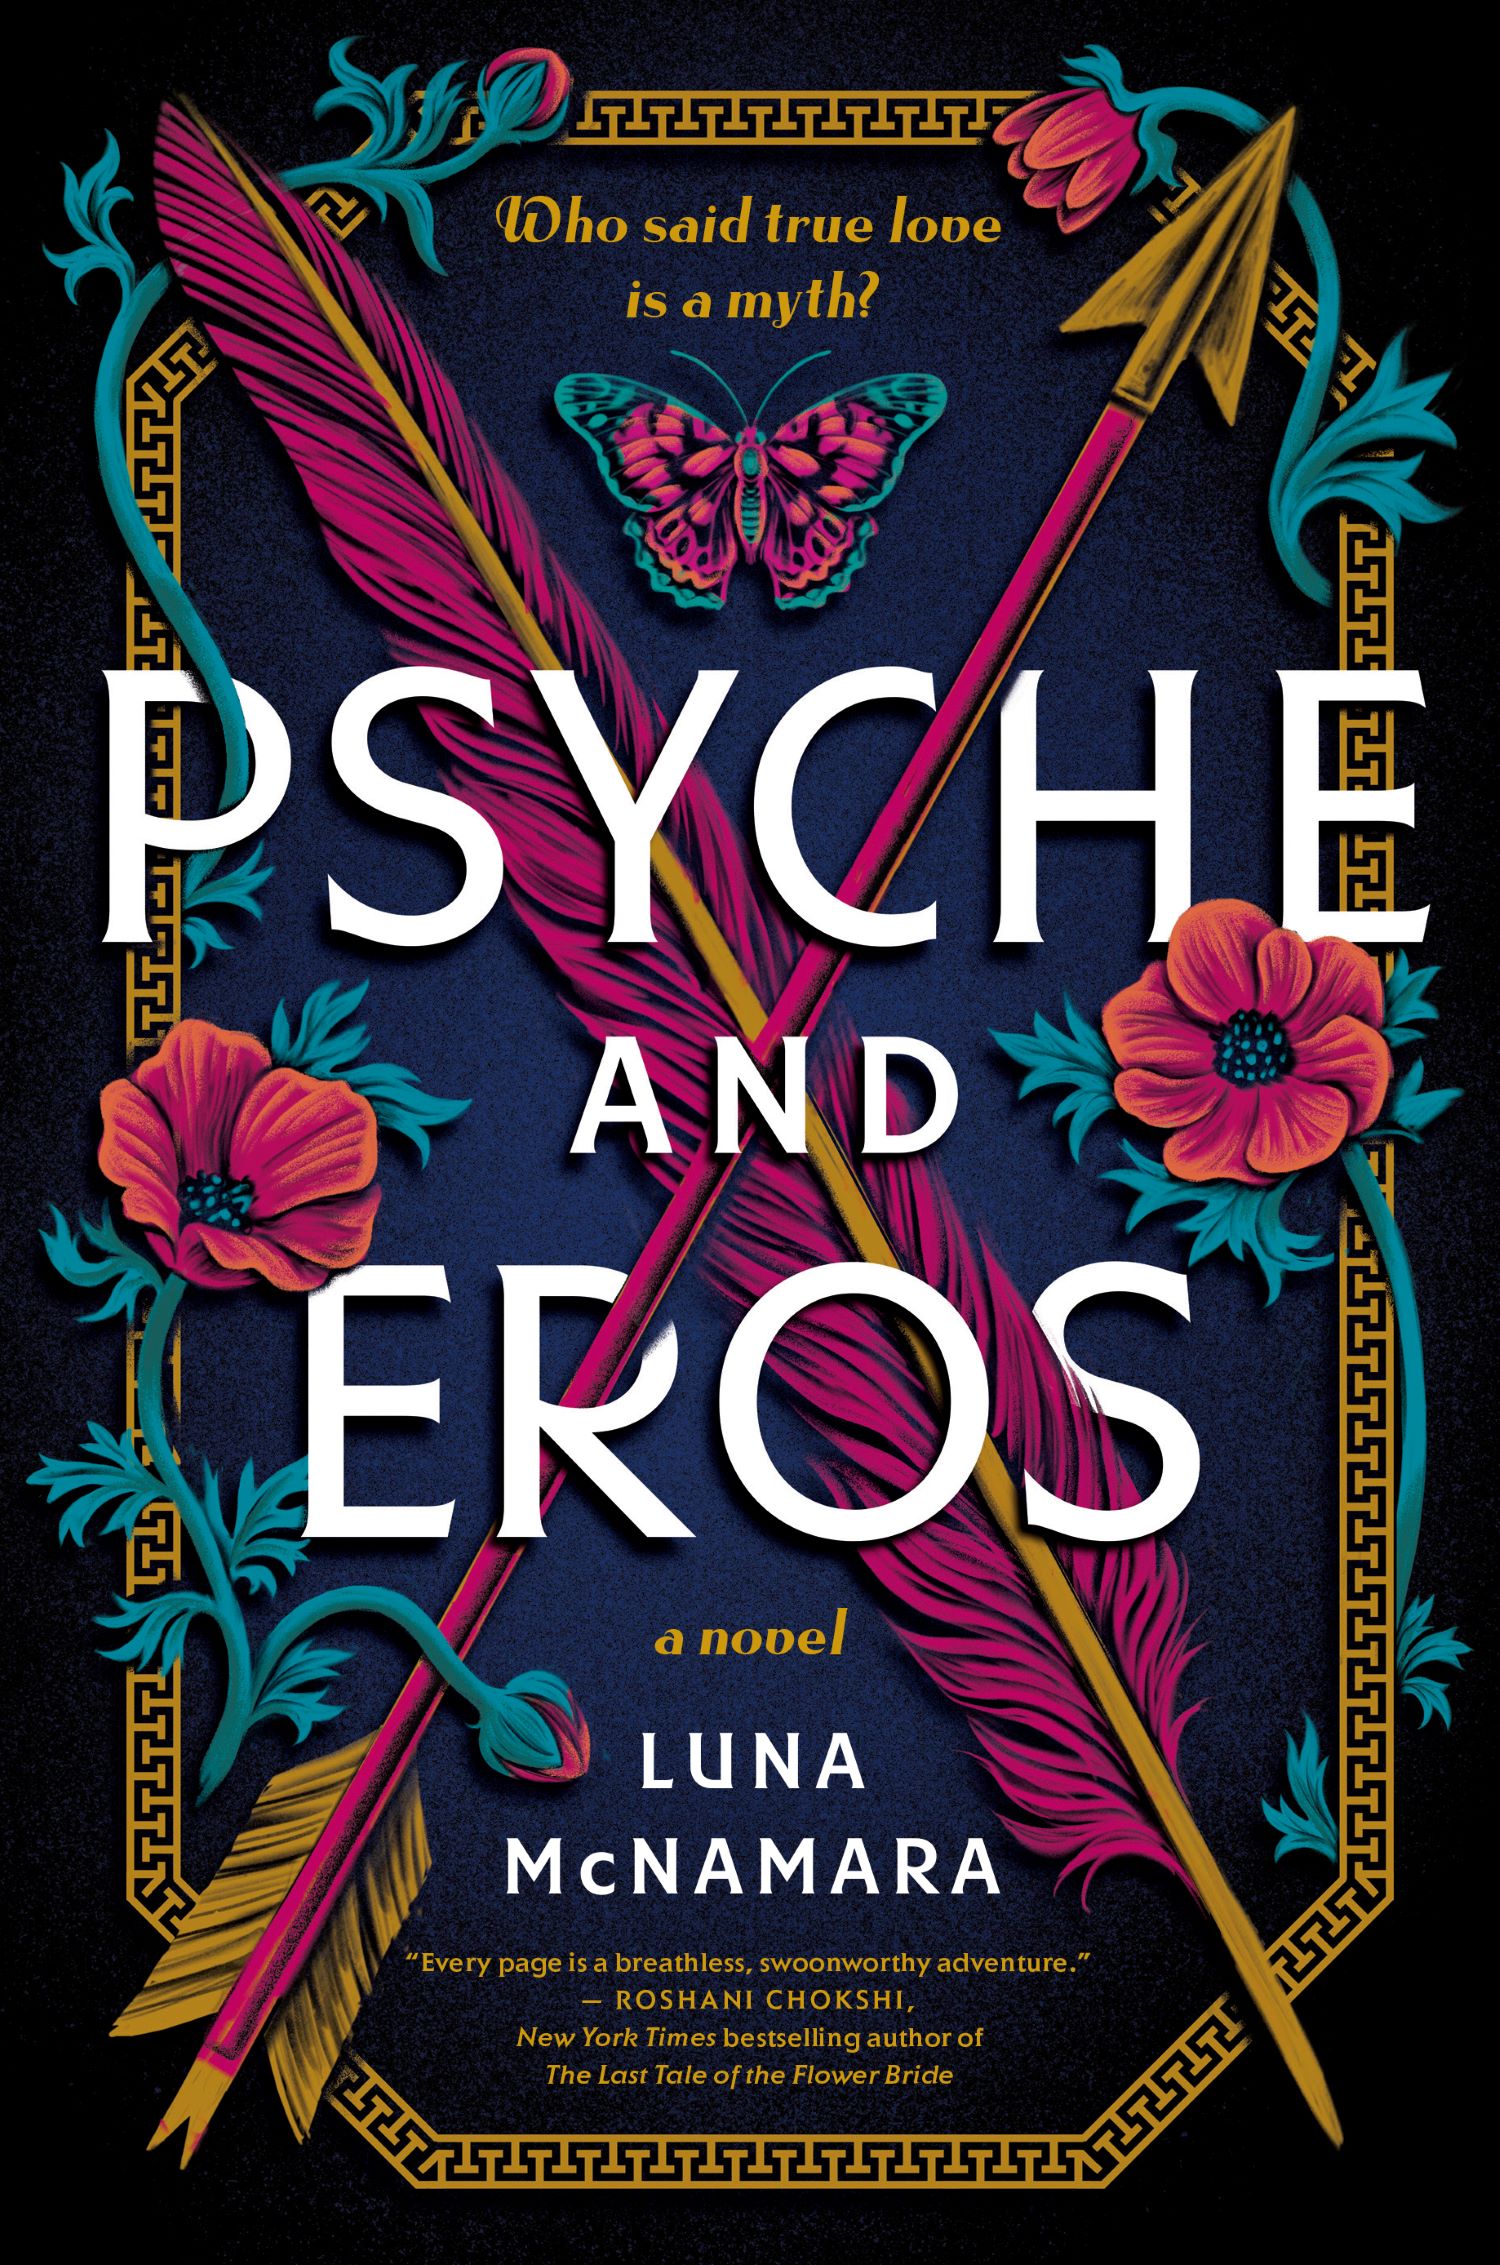 Psyche and Eros, a new myth retelling based on the Greek story of the same name.